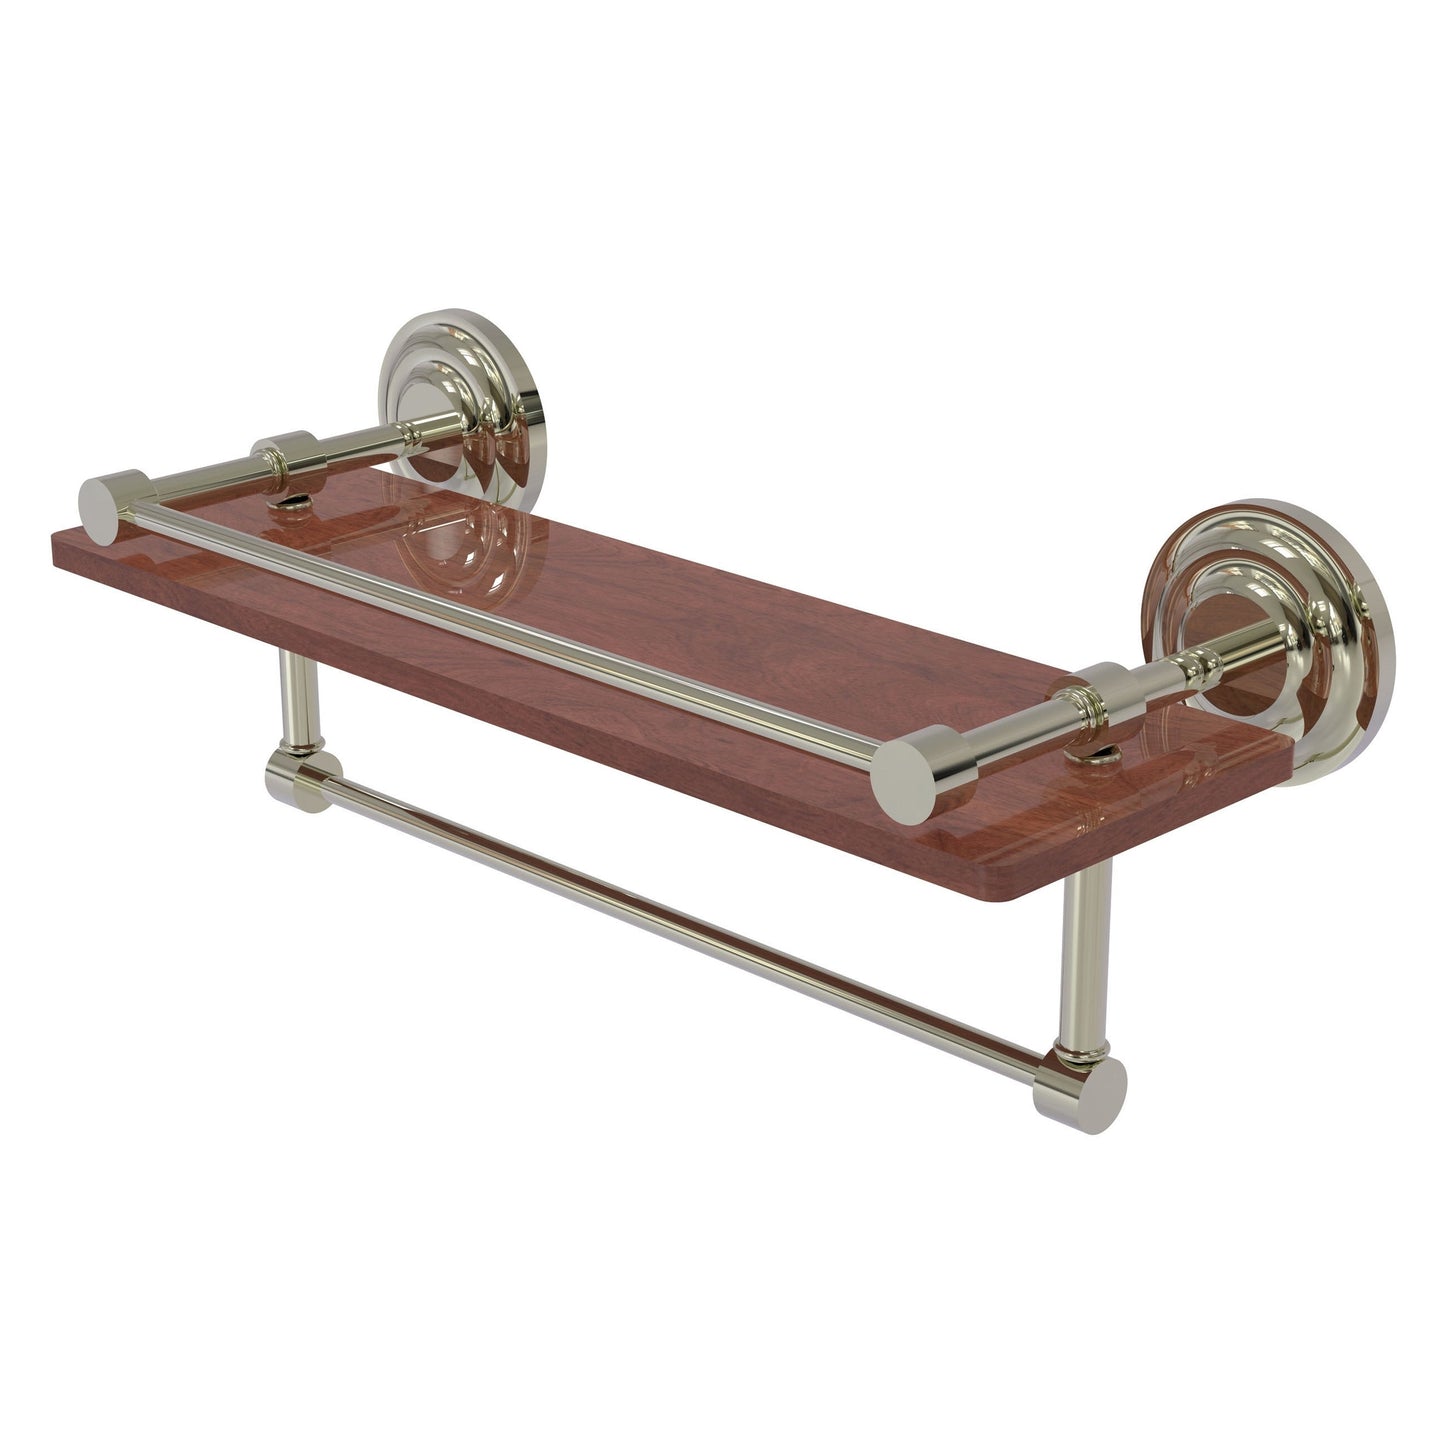 Allied Brass Que New 16" x 5" Polished Nickel Solid Brass 16-Inch IPE Ironwood Shelf With Gallery Rail and Towel Bar